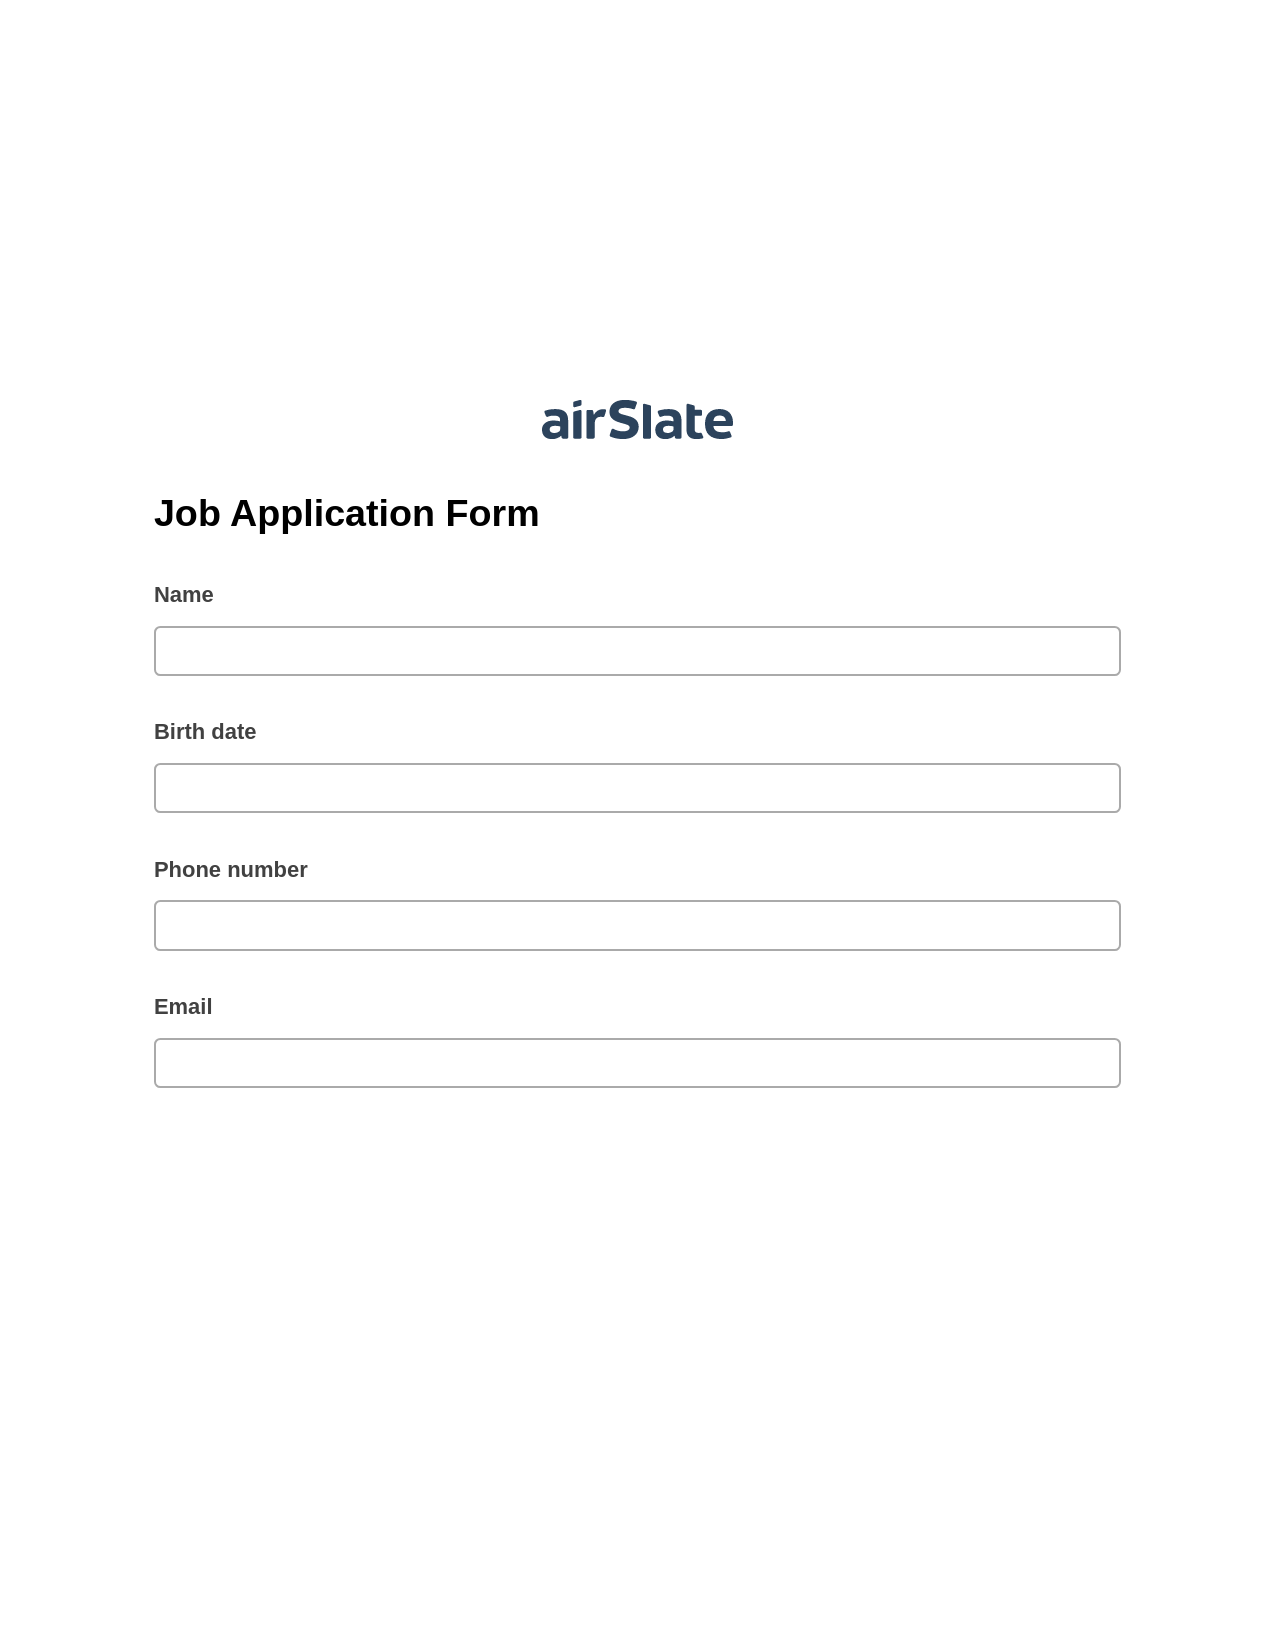 Multirole Job Application Form Pre-fill Slate from MS Dynamics 365 Records Bot, Jira Bot, Export to NetSuite Record Bot